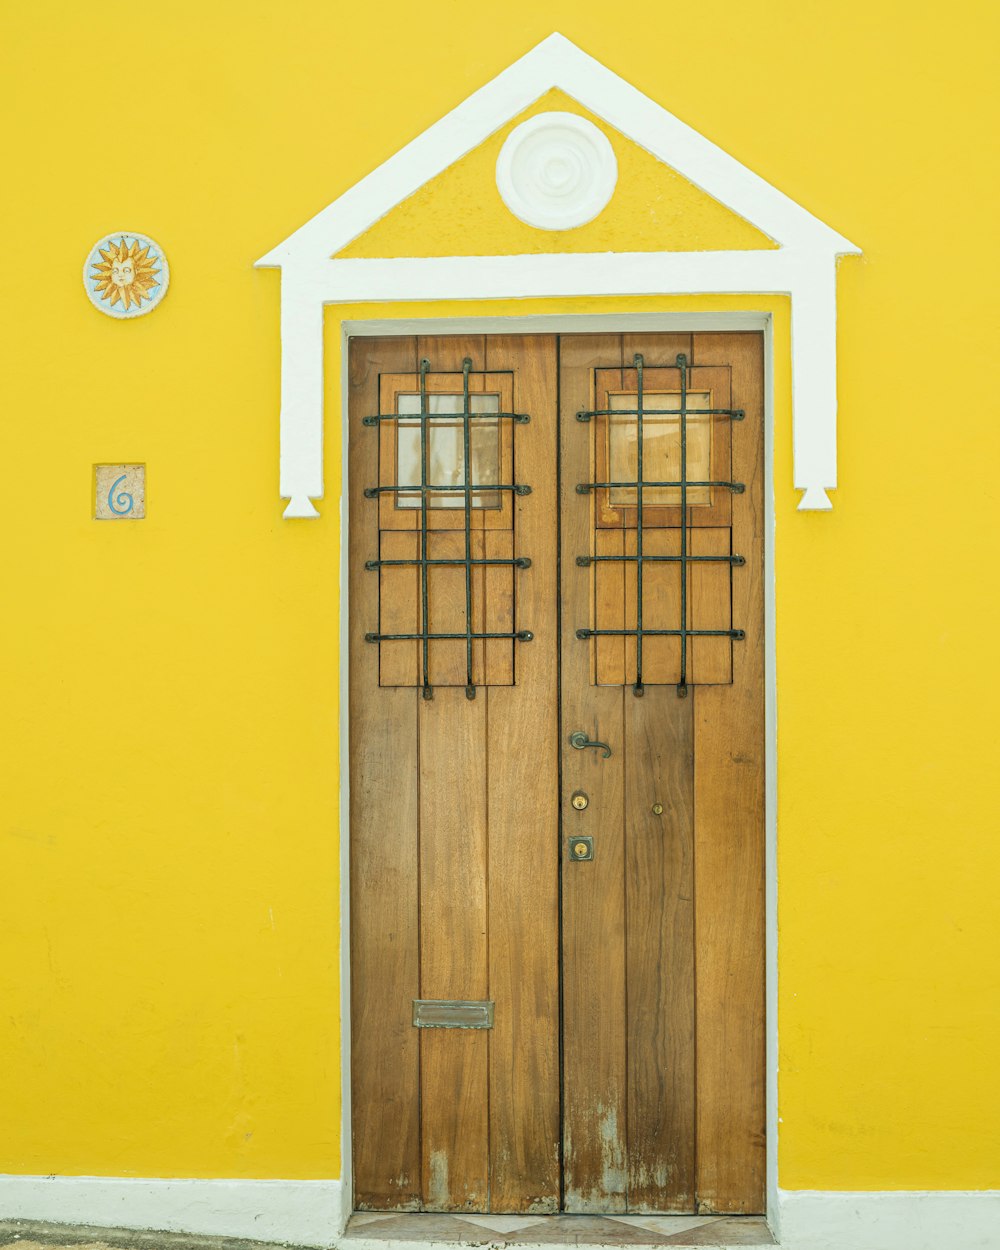 a yellow building with a wooden door and window